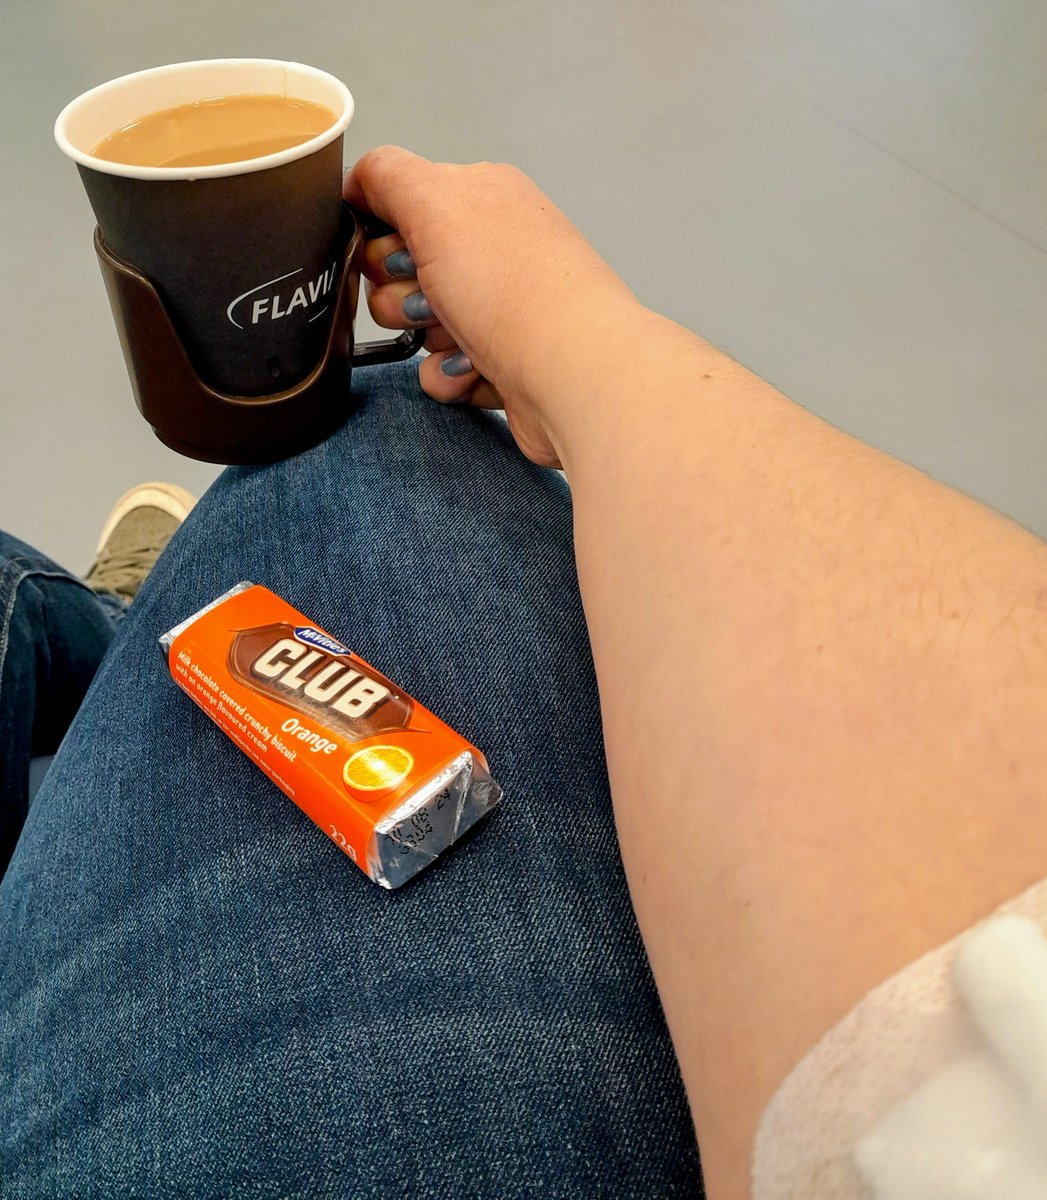 HOT DRINKS ARE BACK! Having a brew with my classic Orange Club, to celebrate a big round number #60 #GiveBlood @NHSBT @GiveBlood